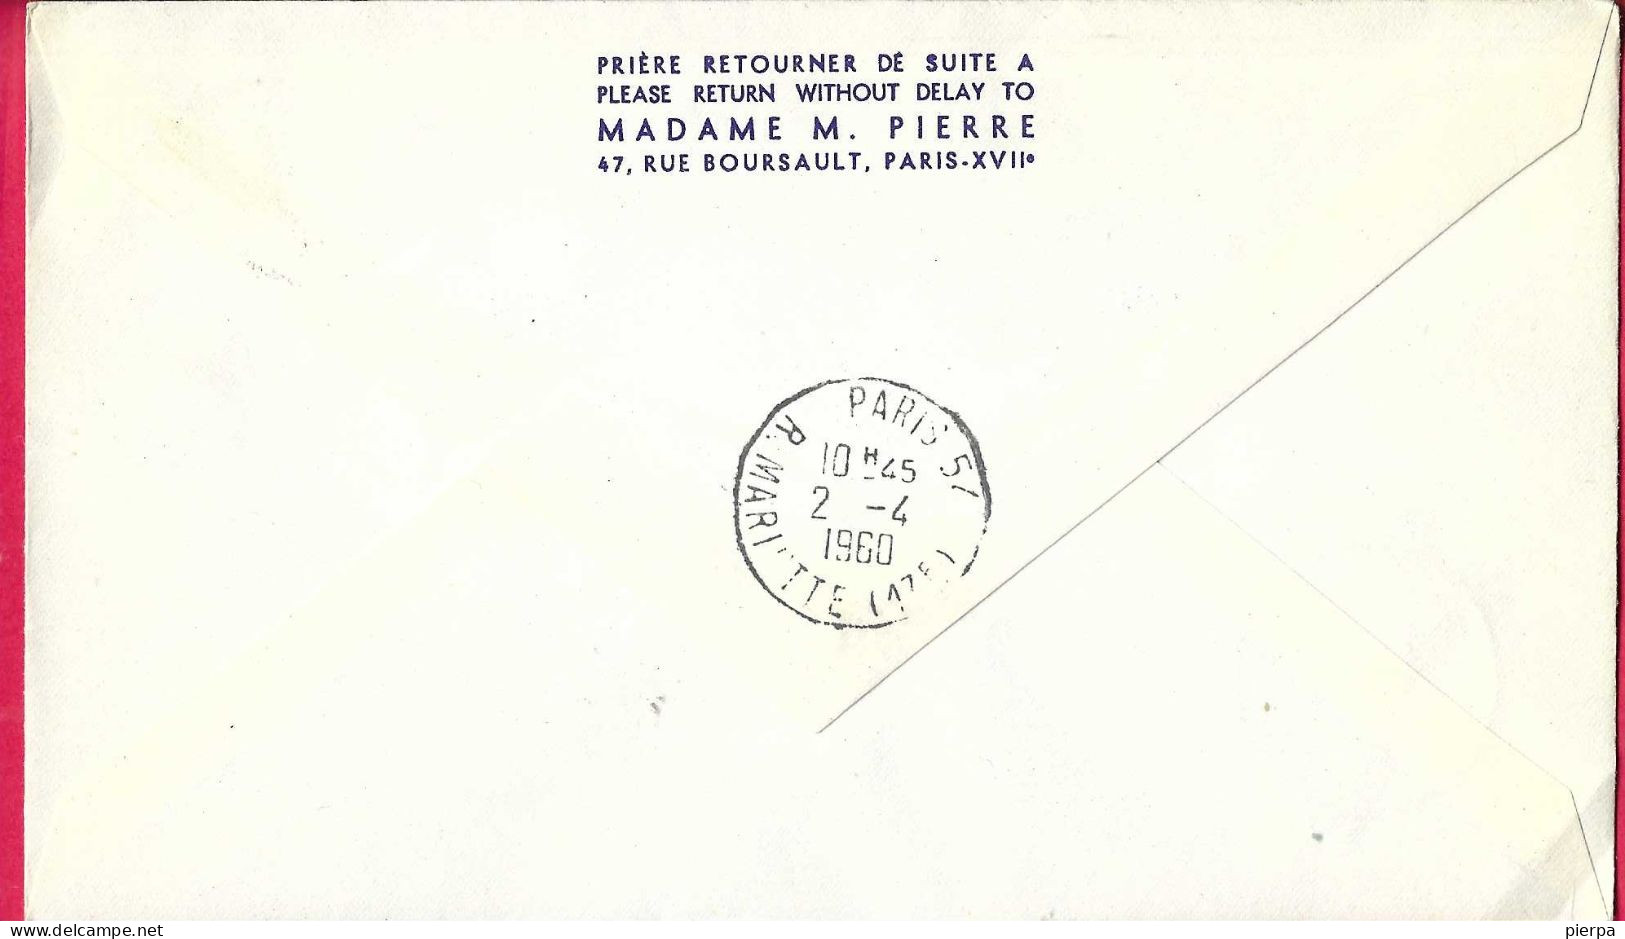 SVERIGE - FIRST CARAVELLE FLIGHT AIR FRANCE FROM STOCKHOLM TO PARIS *1.4.1960* ON OFFICIAL COVER - Lettres & Documents